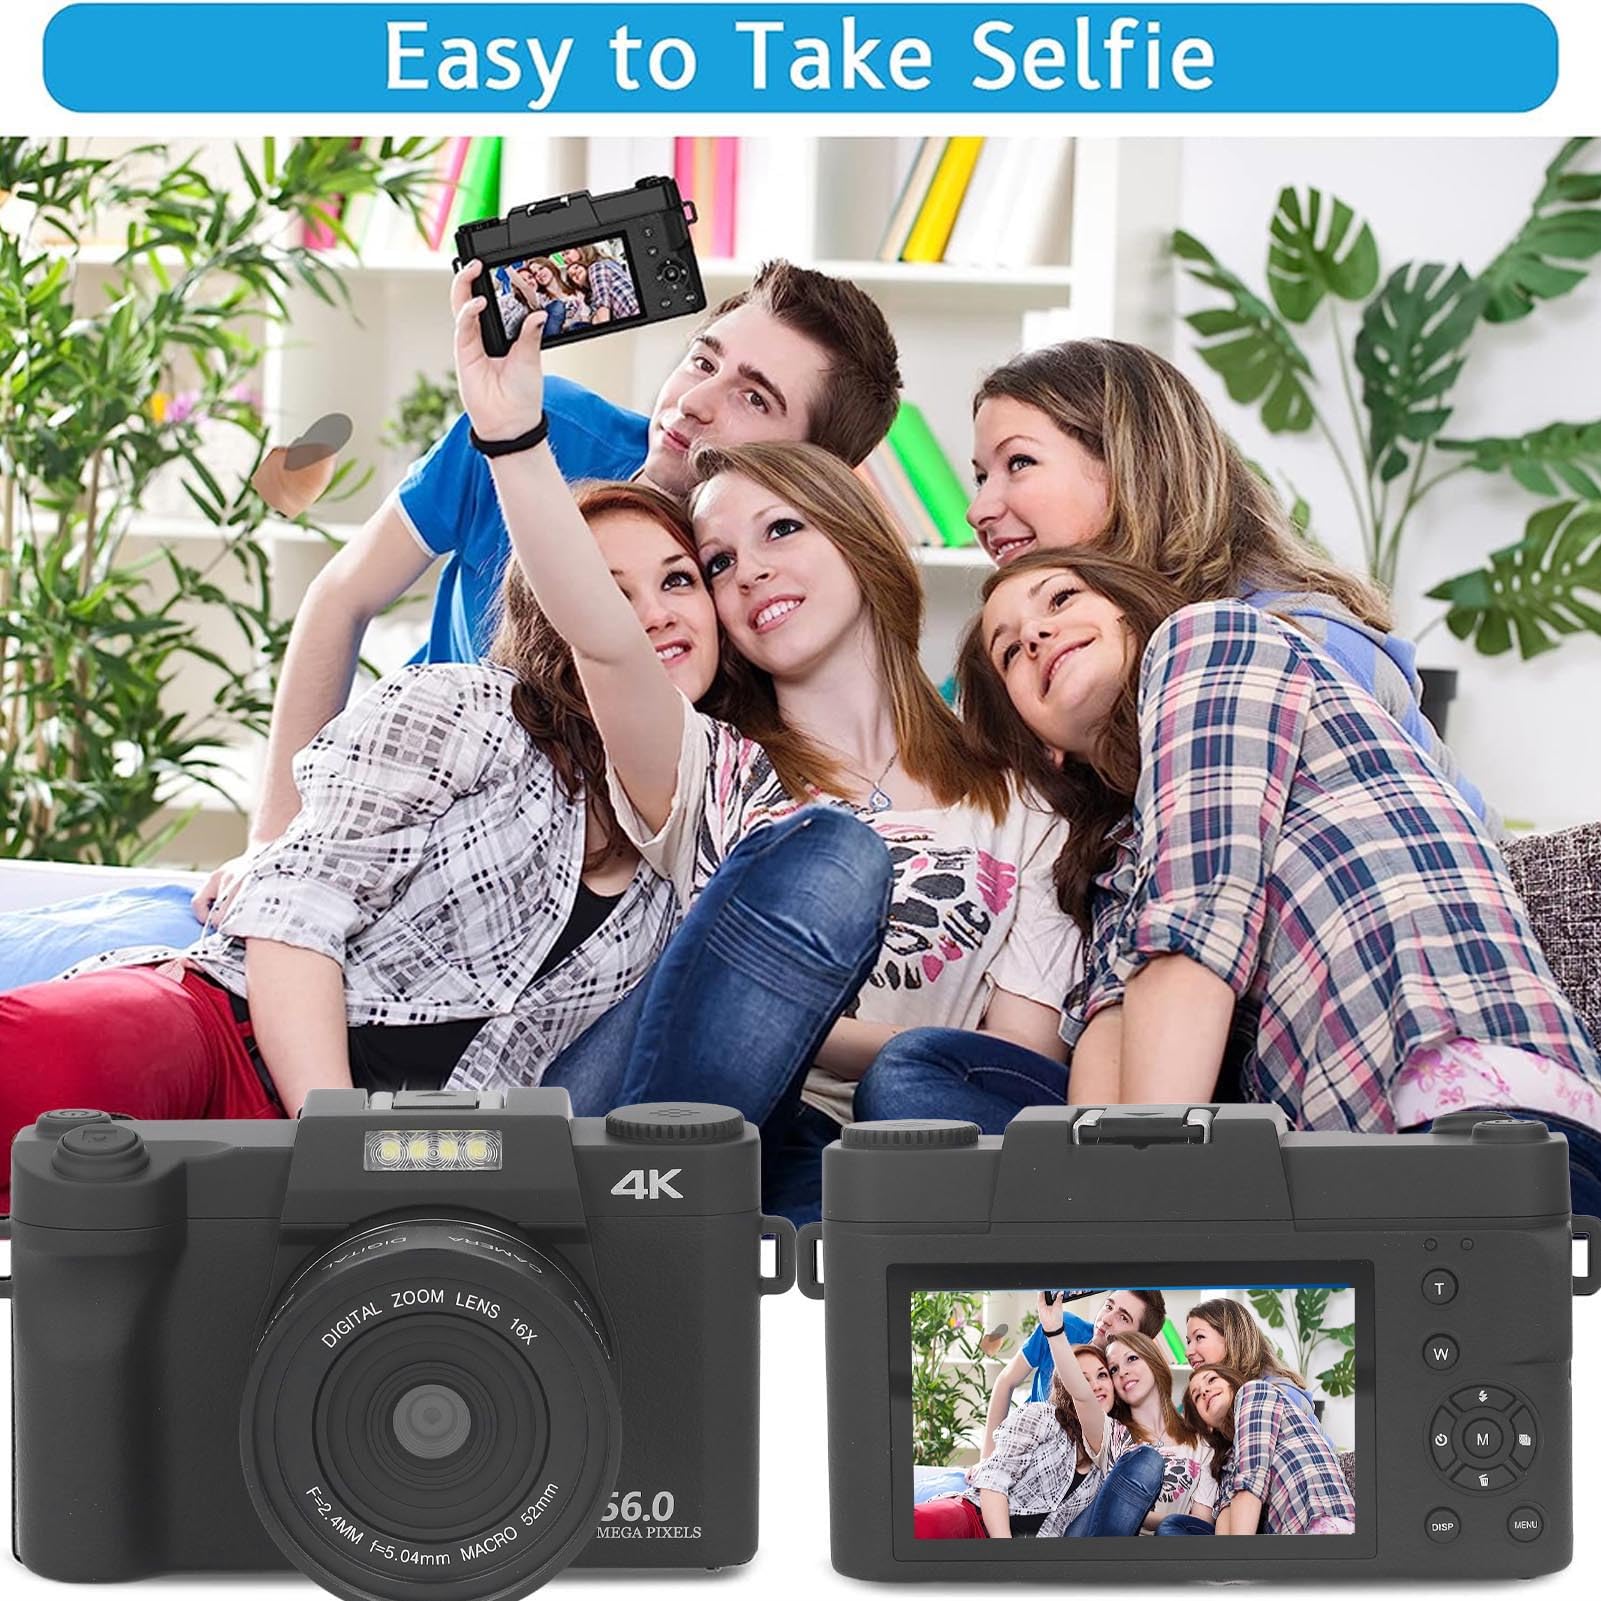 4K Digital Camera for Kids Video 16X 56M Digital Zoom, Compact Point and Shoot Camera, Portable Small Camera for Teens Students Boys Girls Seniors, WiFi, Gifts